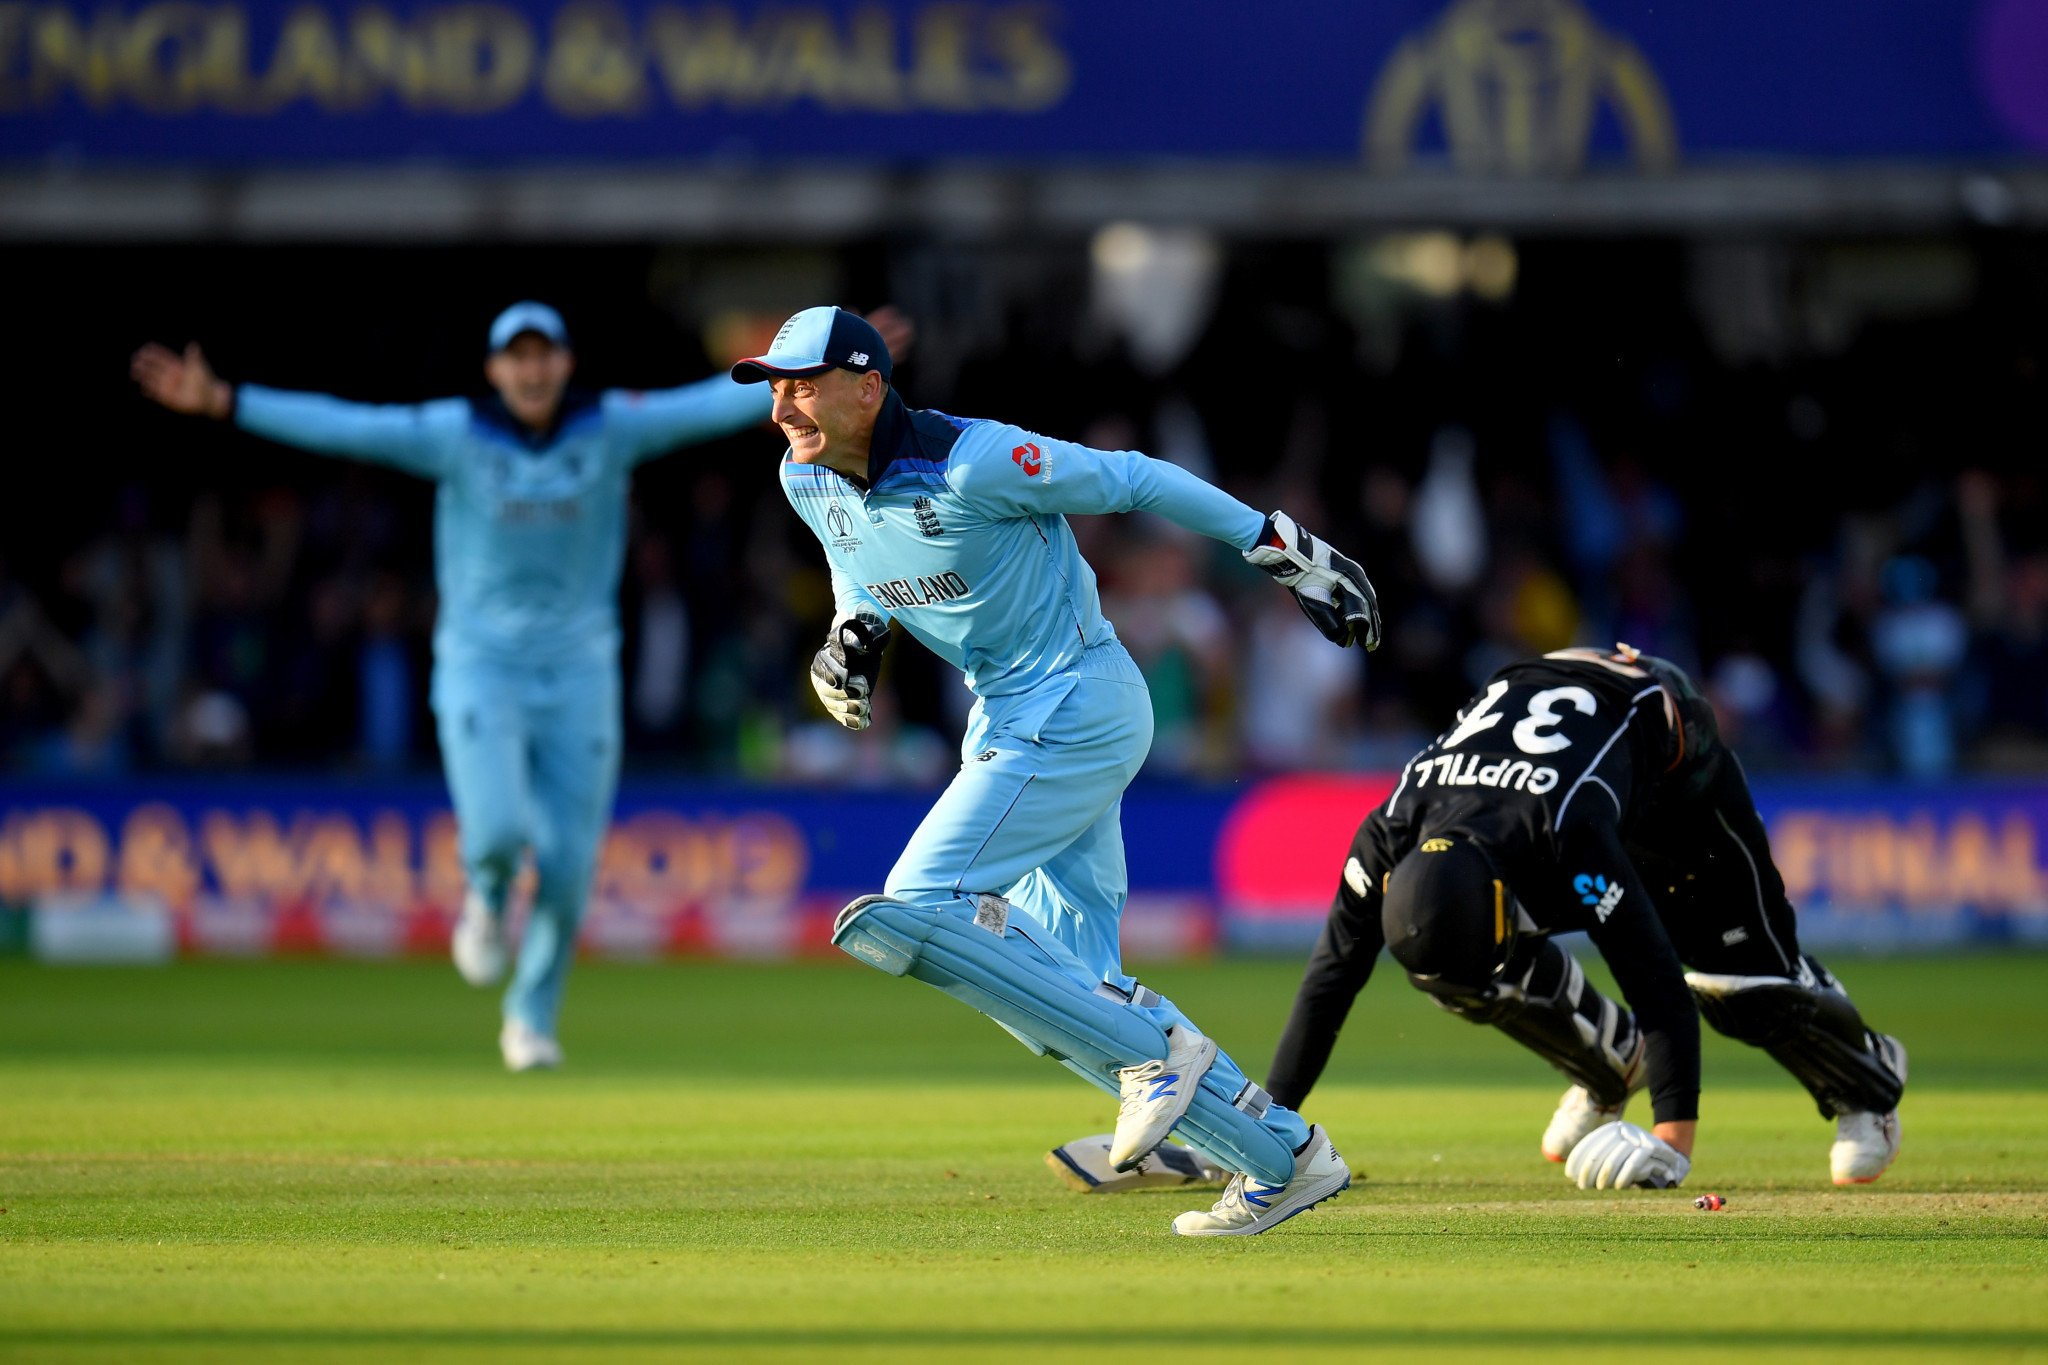 England wicket-keeper Jos Buttler runs out New Zealand's Martin Guptil on the final ball of a dramatic super over to give his side victory in the World Cup final at Lord's ©Getty Images